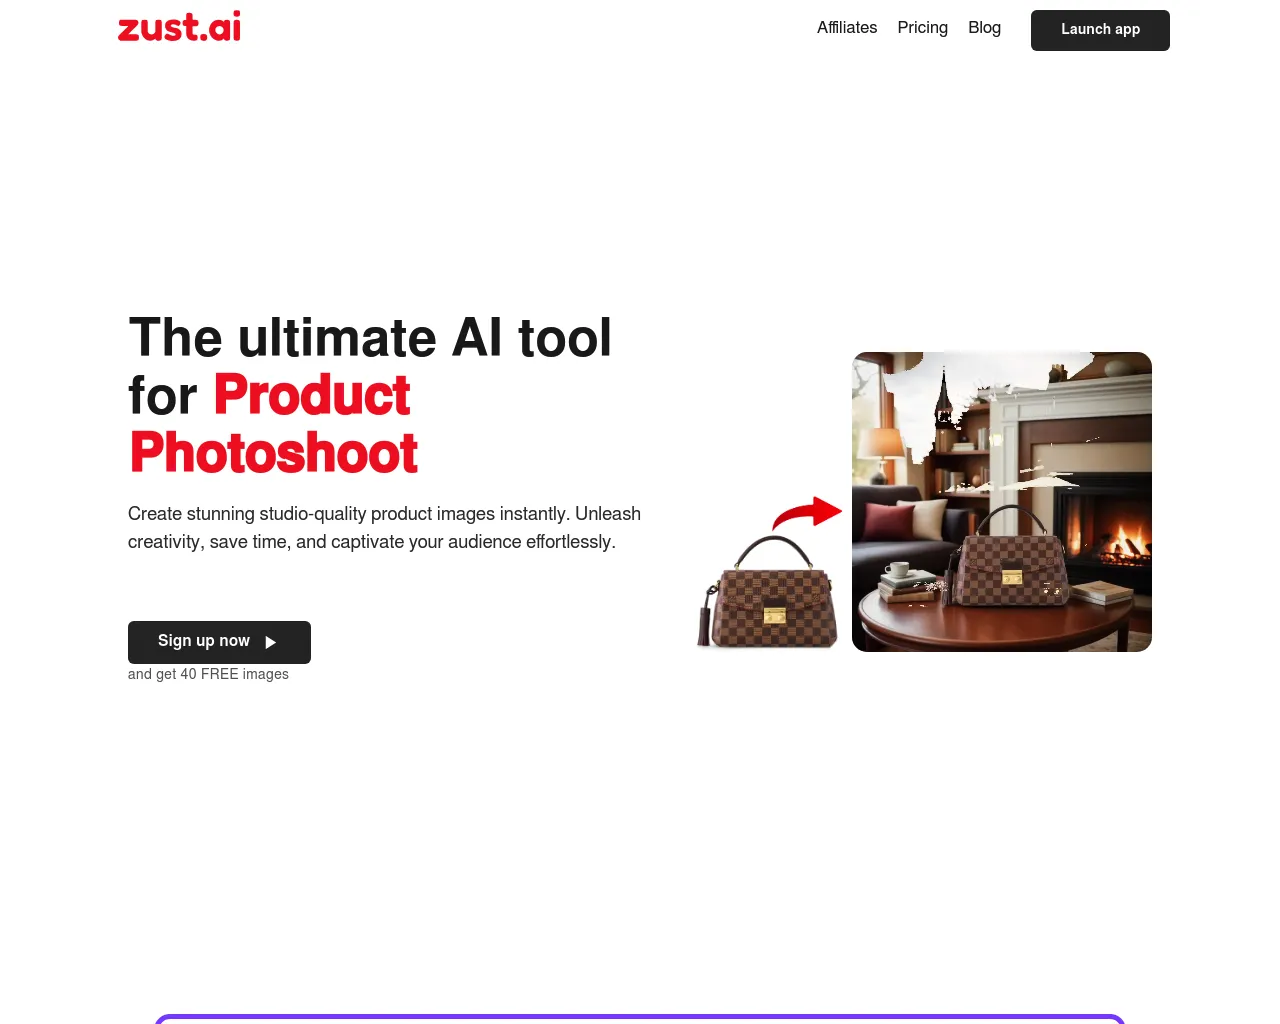 The ultimate AI platform for Product Photoshoot